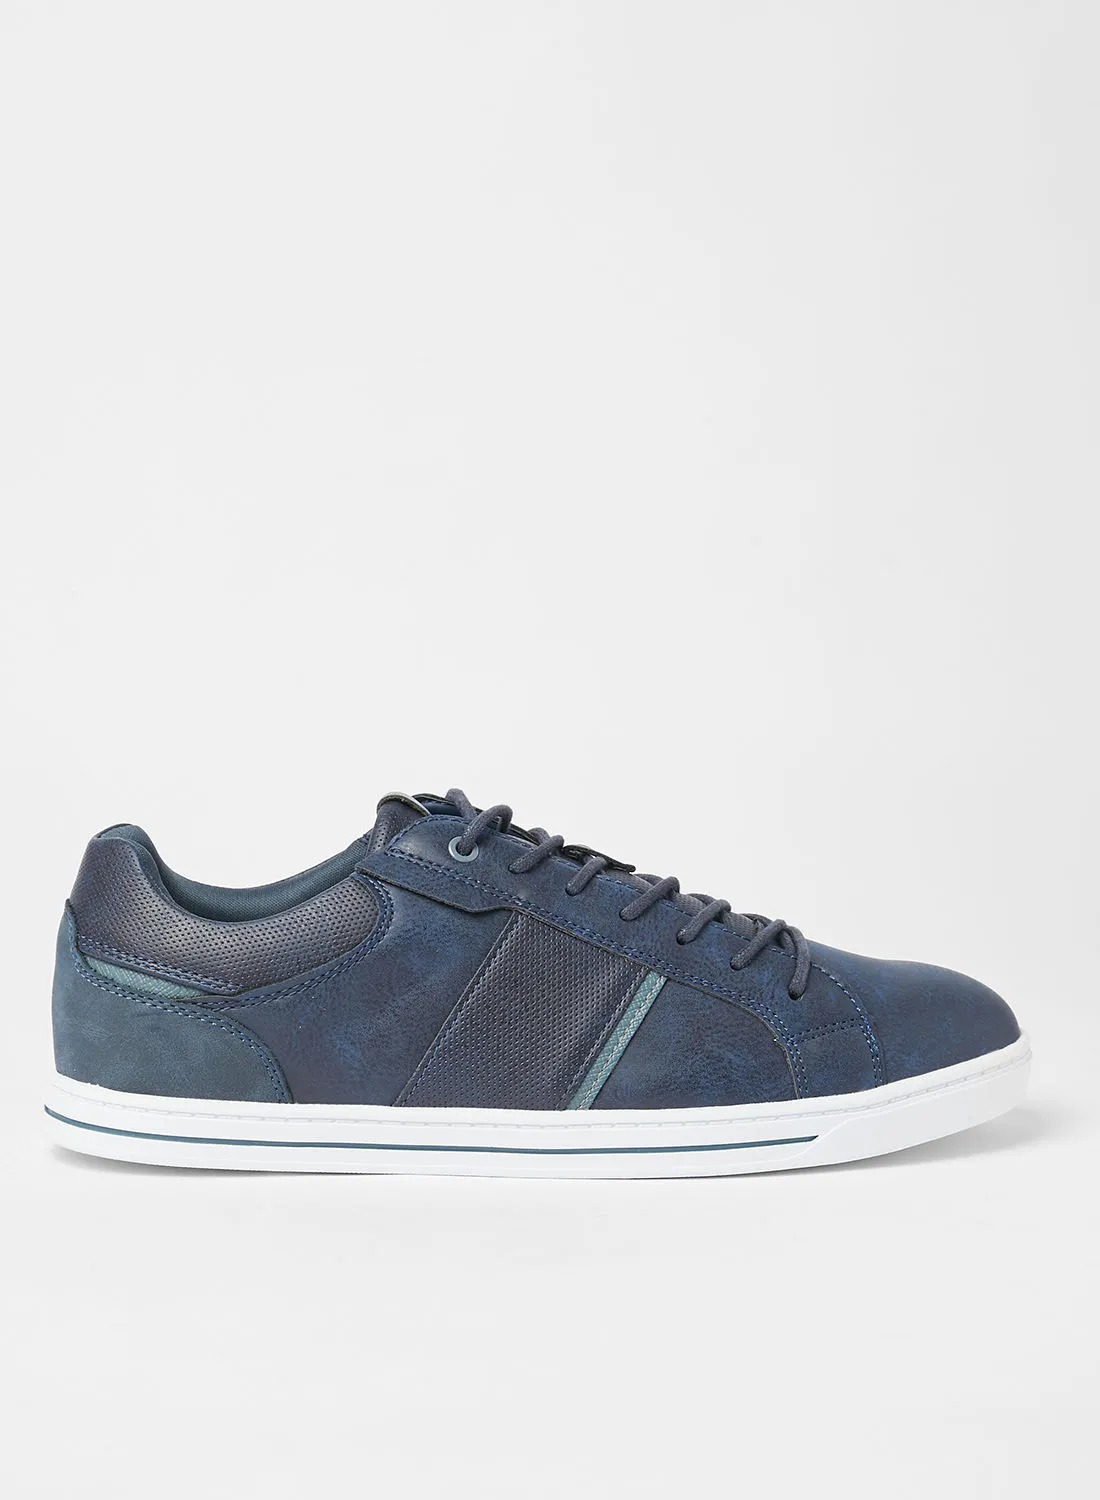 CALL IT SPRING Carter Low Top Sneakers Blue